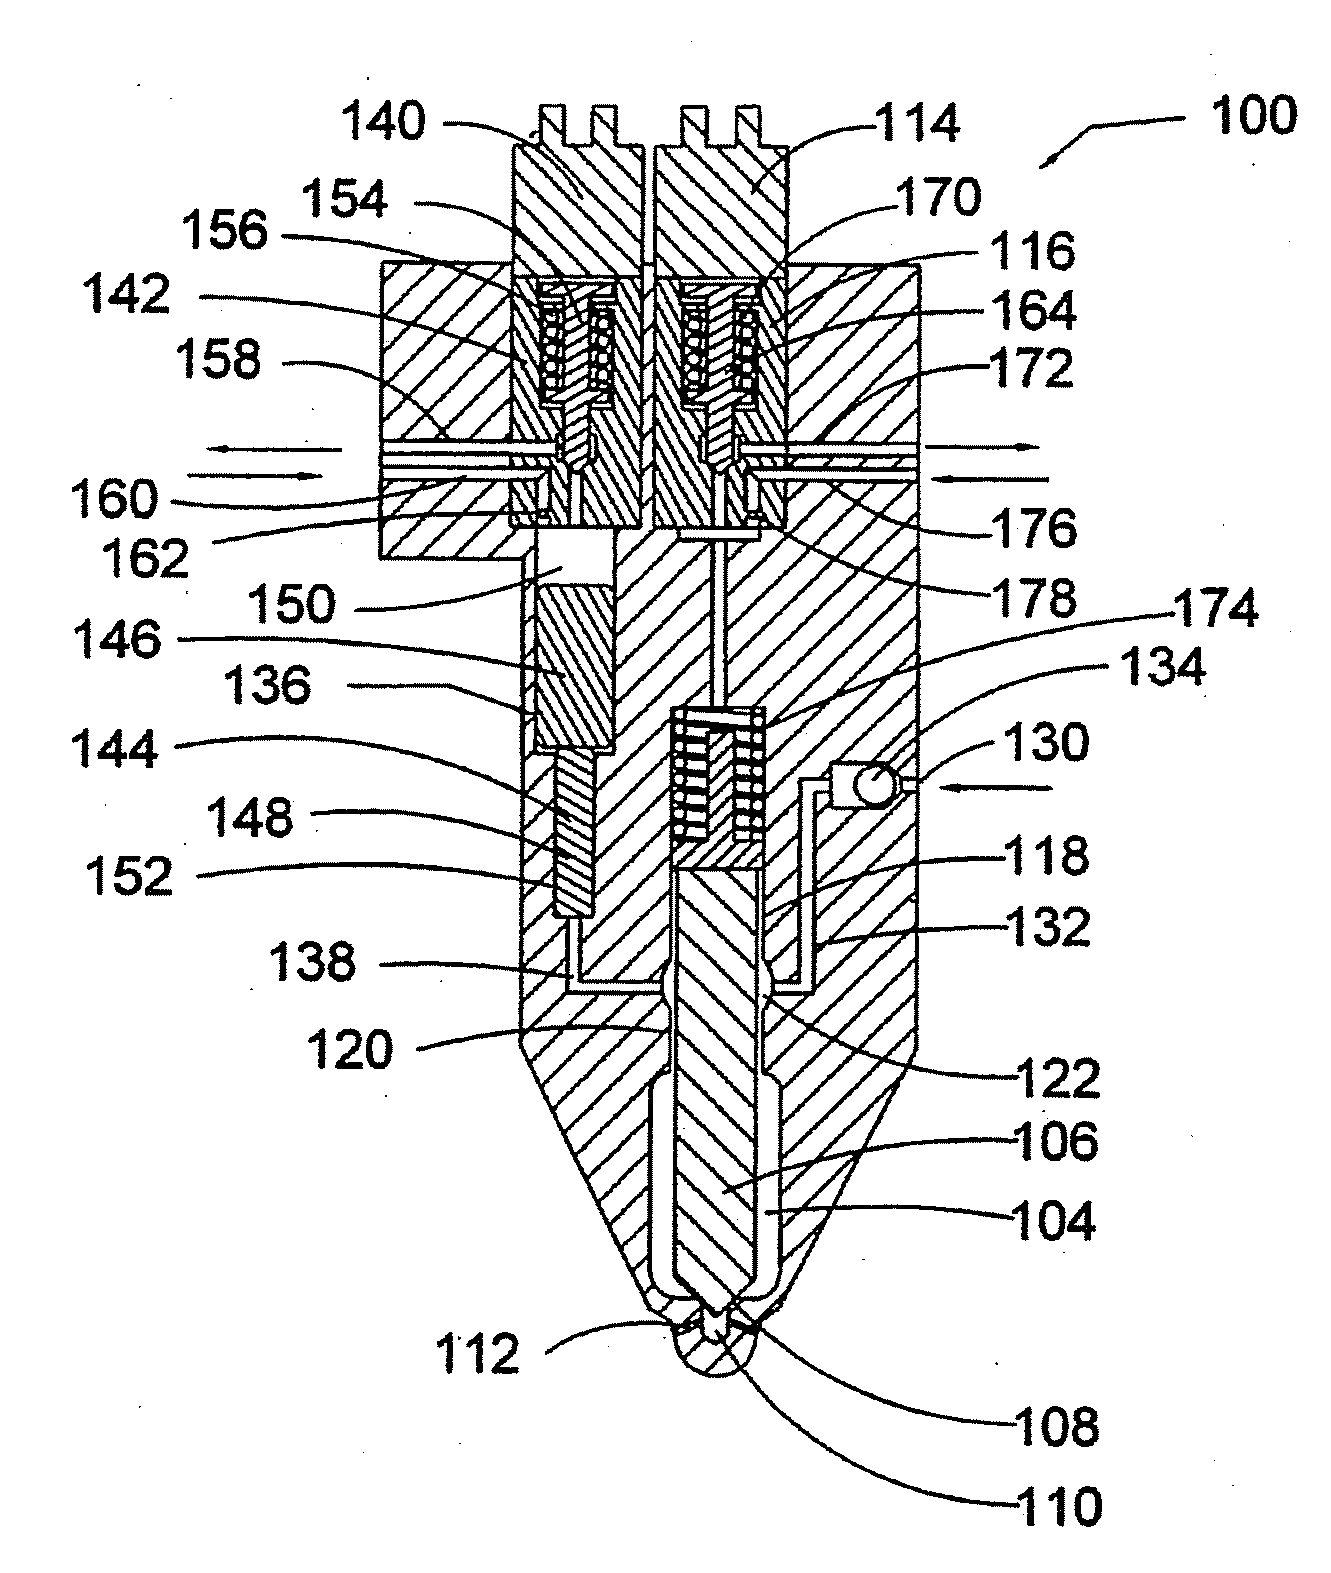 Fuel Injection Valve And Method For Co-Injecting A Liquid And A Gaseous Fuel Into The Combustion Chamber Of An Internal Combustion Engine